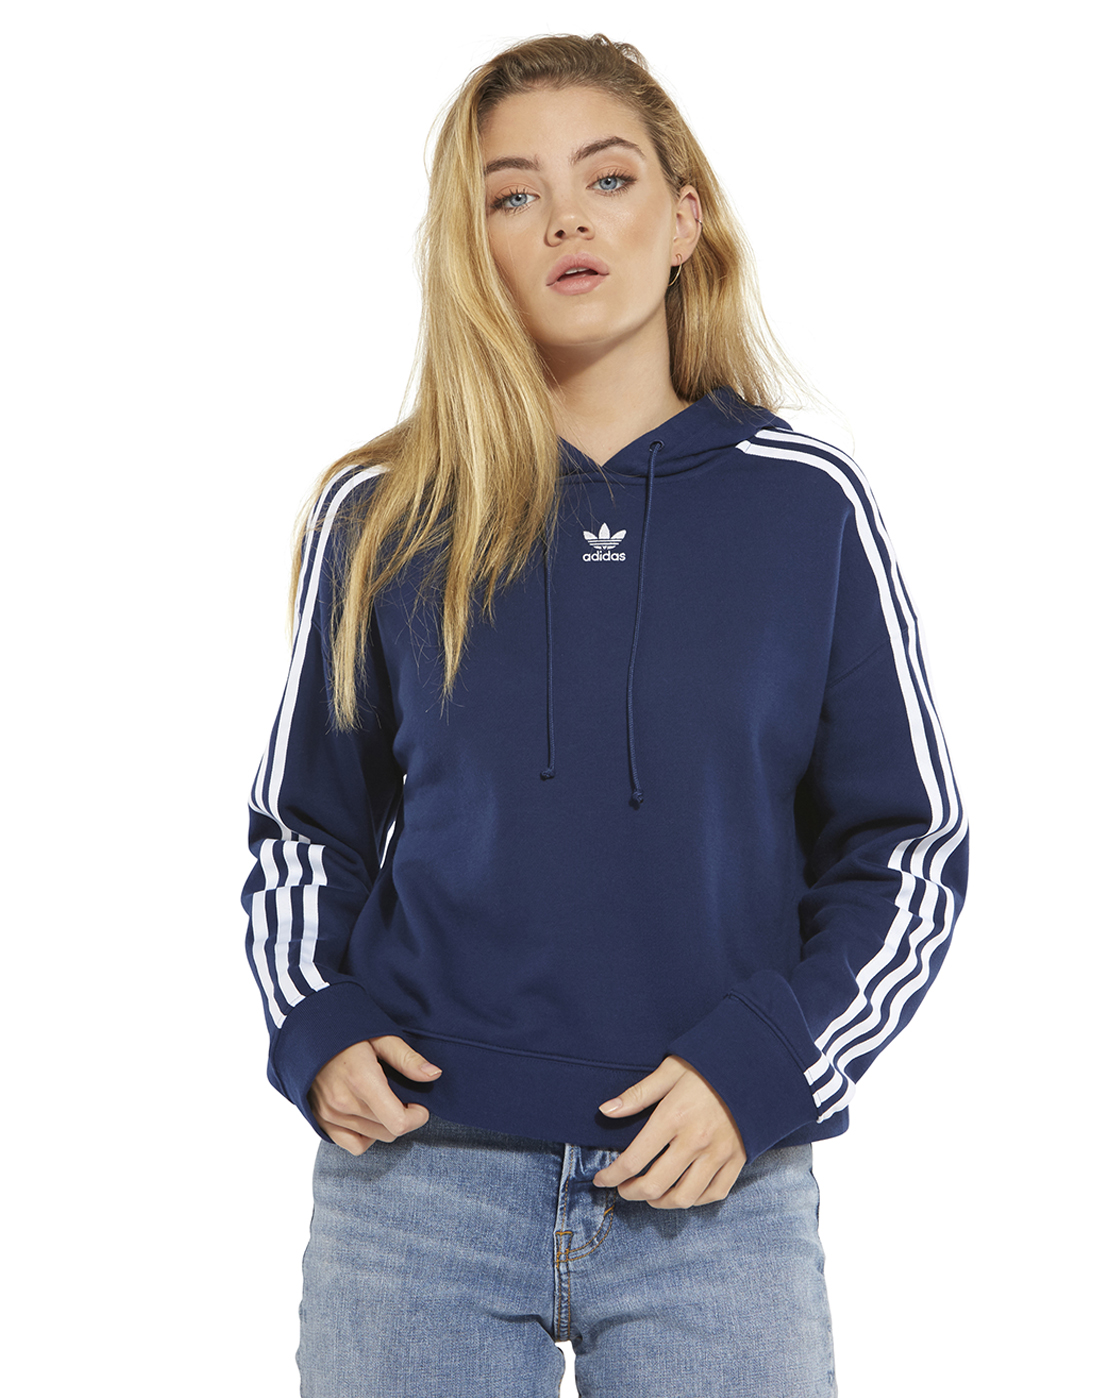 Women's Navy adidas Originals Cropped Hoodie | Life Style Sports